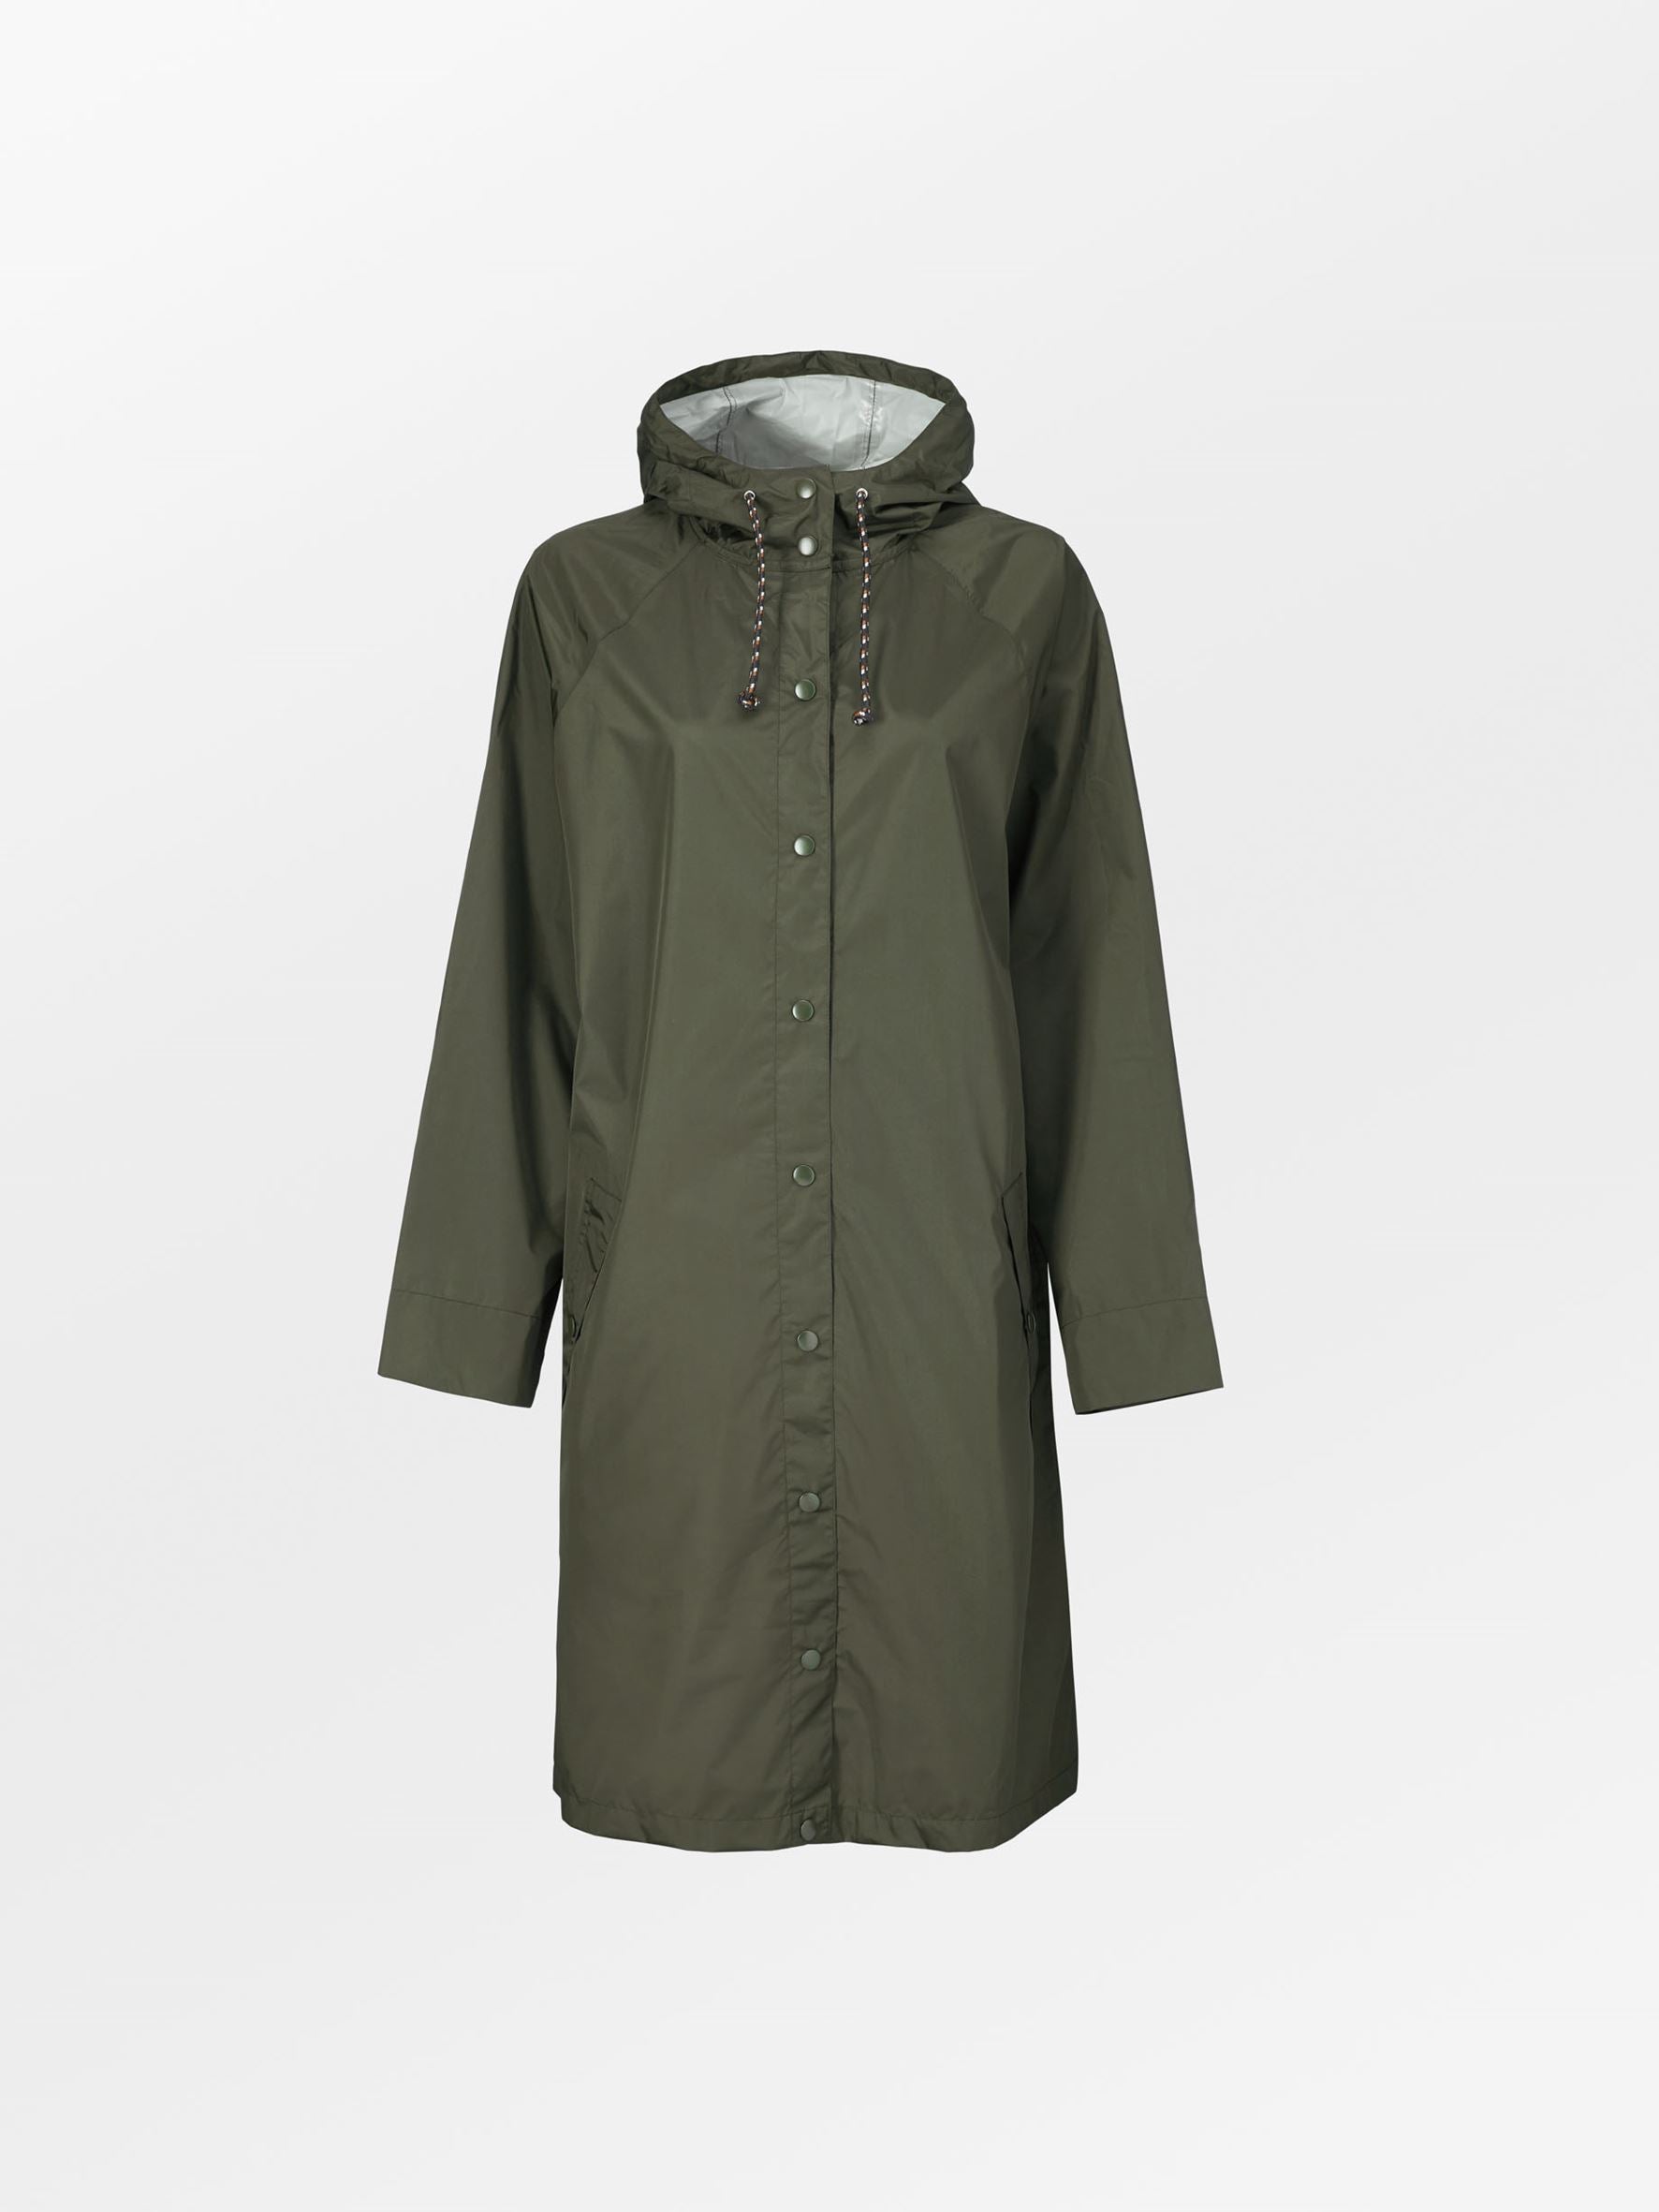 Becksöndergaard, Solid Magpie Raincoat - Army Green, archive, sale, accessories, sale, archive